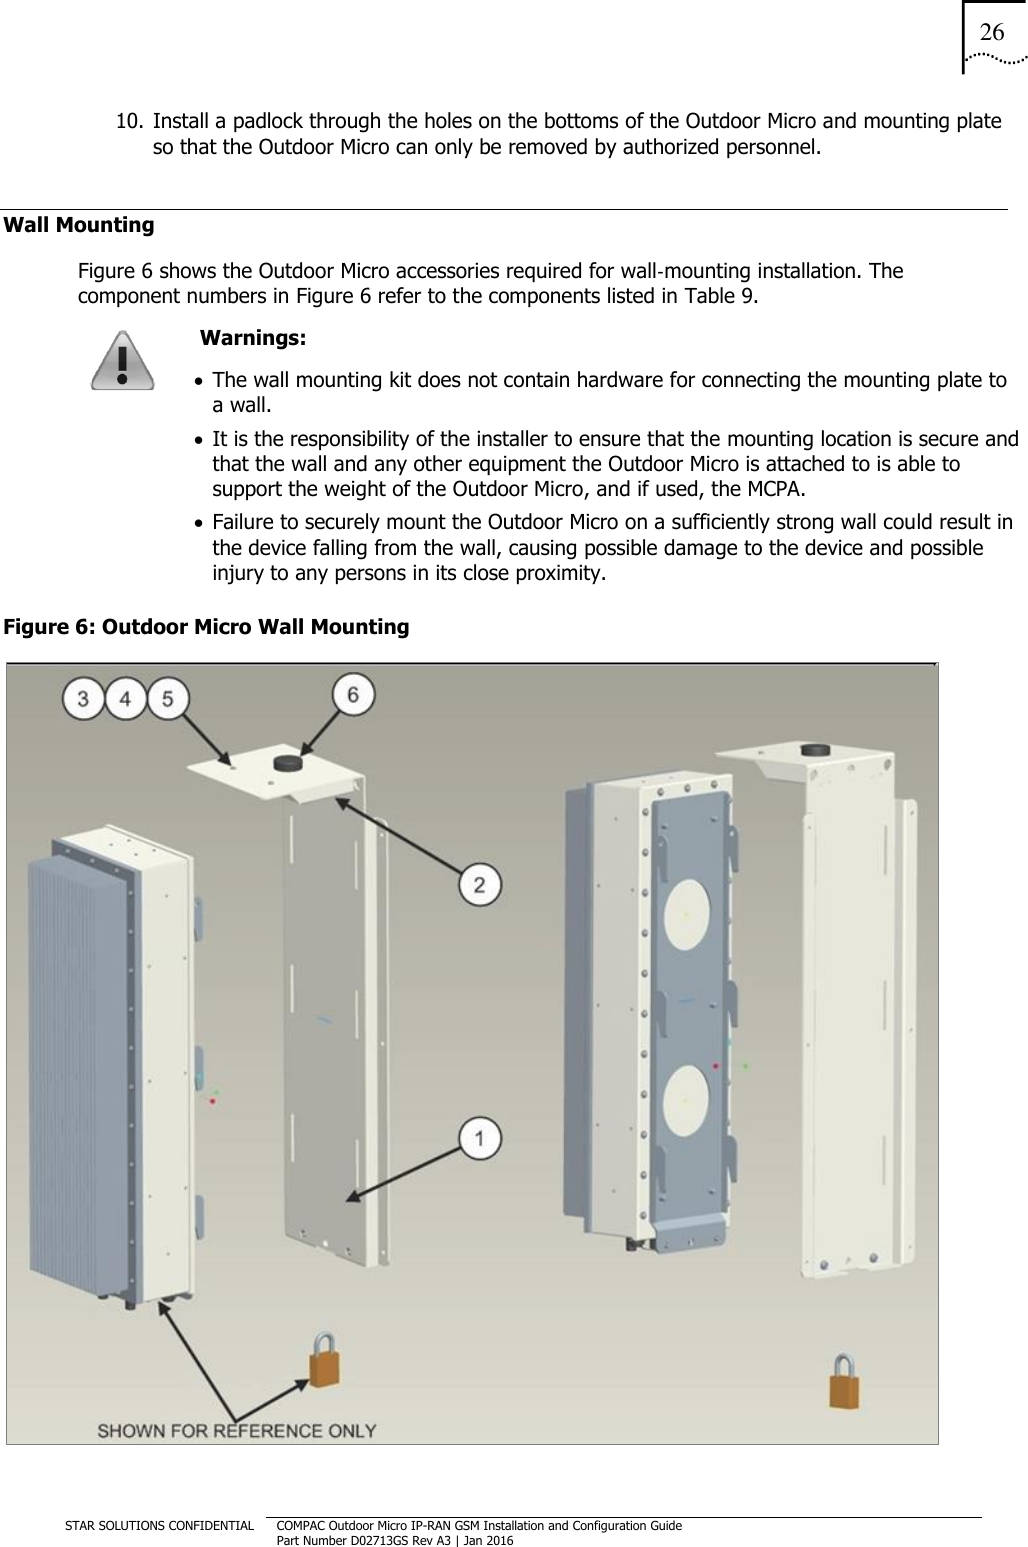 26  STAR SOLUTIONS CONFIDENTIAL COMPAC Outdoor Micro IP-RAN GSM Installation and Configuration Guide Part Number D02713GS Rev A3 | Jan 2016  10. Install a padlock through the holes on the bottoms of the Outdoor Micro and mounting plate so that the Outdoor Micro can only be removed by authorized personnel. Wall Mounting Figure 6 shows the Outdoor Micro accessories required for wall‐mounting installation. The component numbers in Figure 6 refer to the components listed in Table 9.  Warnings:   The wall mounting kit does not contain hardware for connecting the mounting plate to a wall.   It is the responsibility of the installer to ensure that the mounting location is secure and that the wall and any other equipment the Outdoor Micro is attached to is able to support the weight of the Outdoor Micro, and if used, the MCPA.   Failure to securely mount the Outdoor Micro on a sufficiently strong wall could result in the device falling from the wall, causing possible damage to the device and possible injury to any persons in its close proximity. Figure 6: Outdoor Micro Wall Mounting  